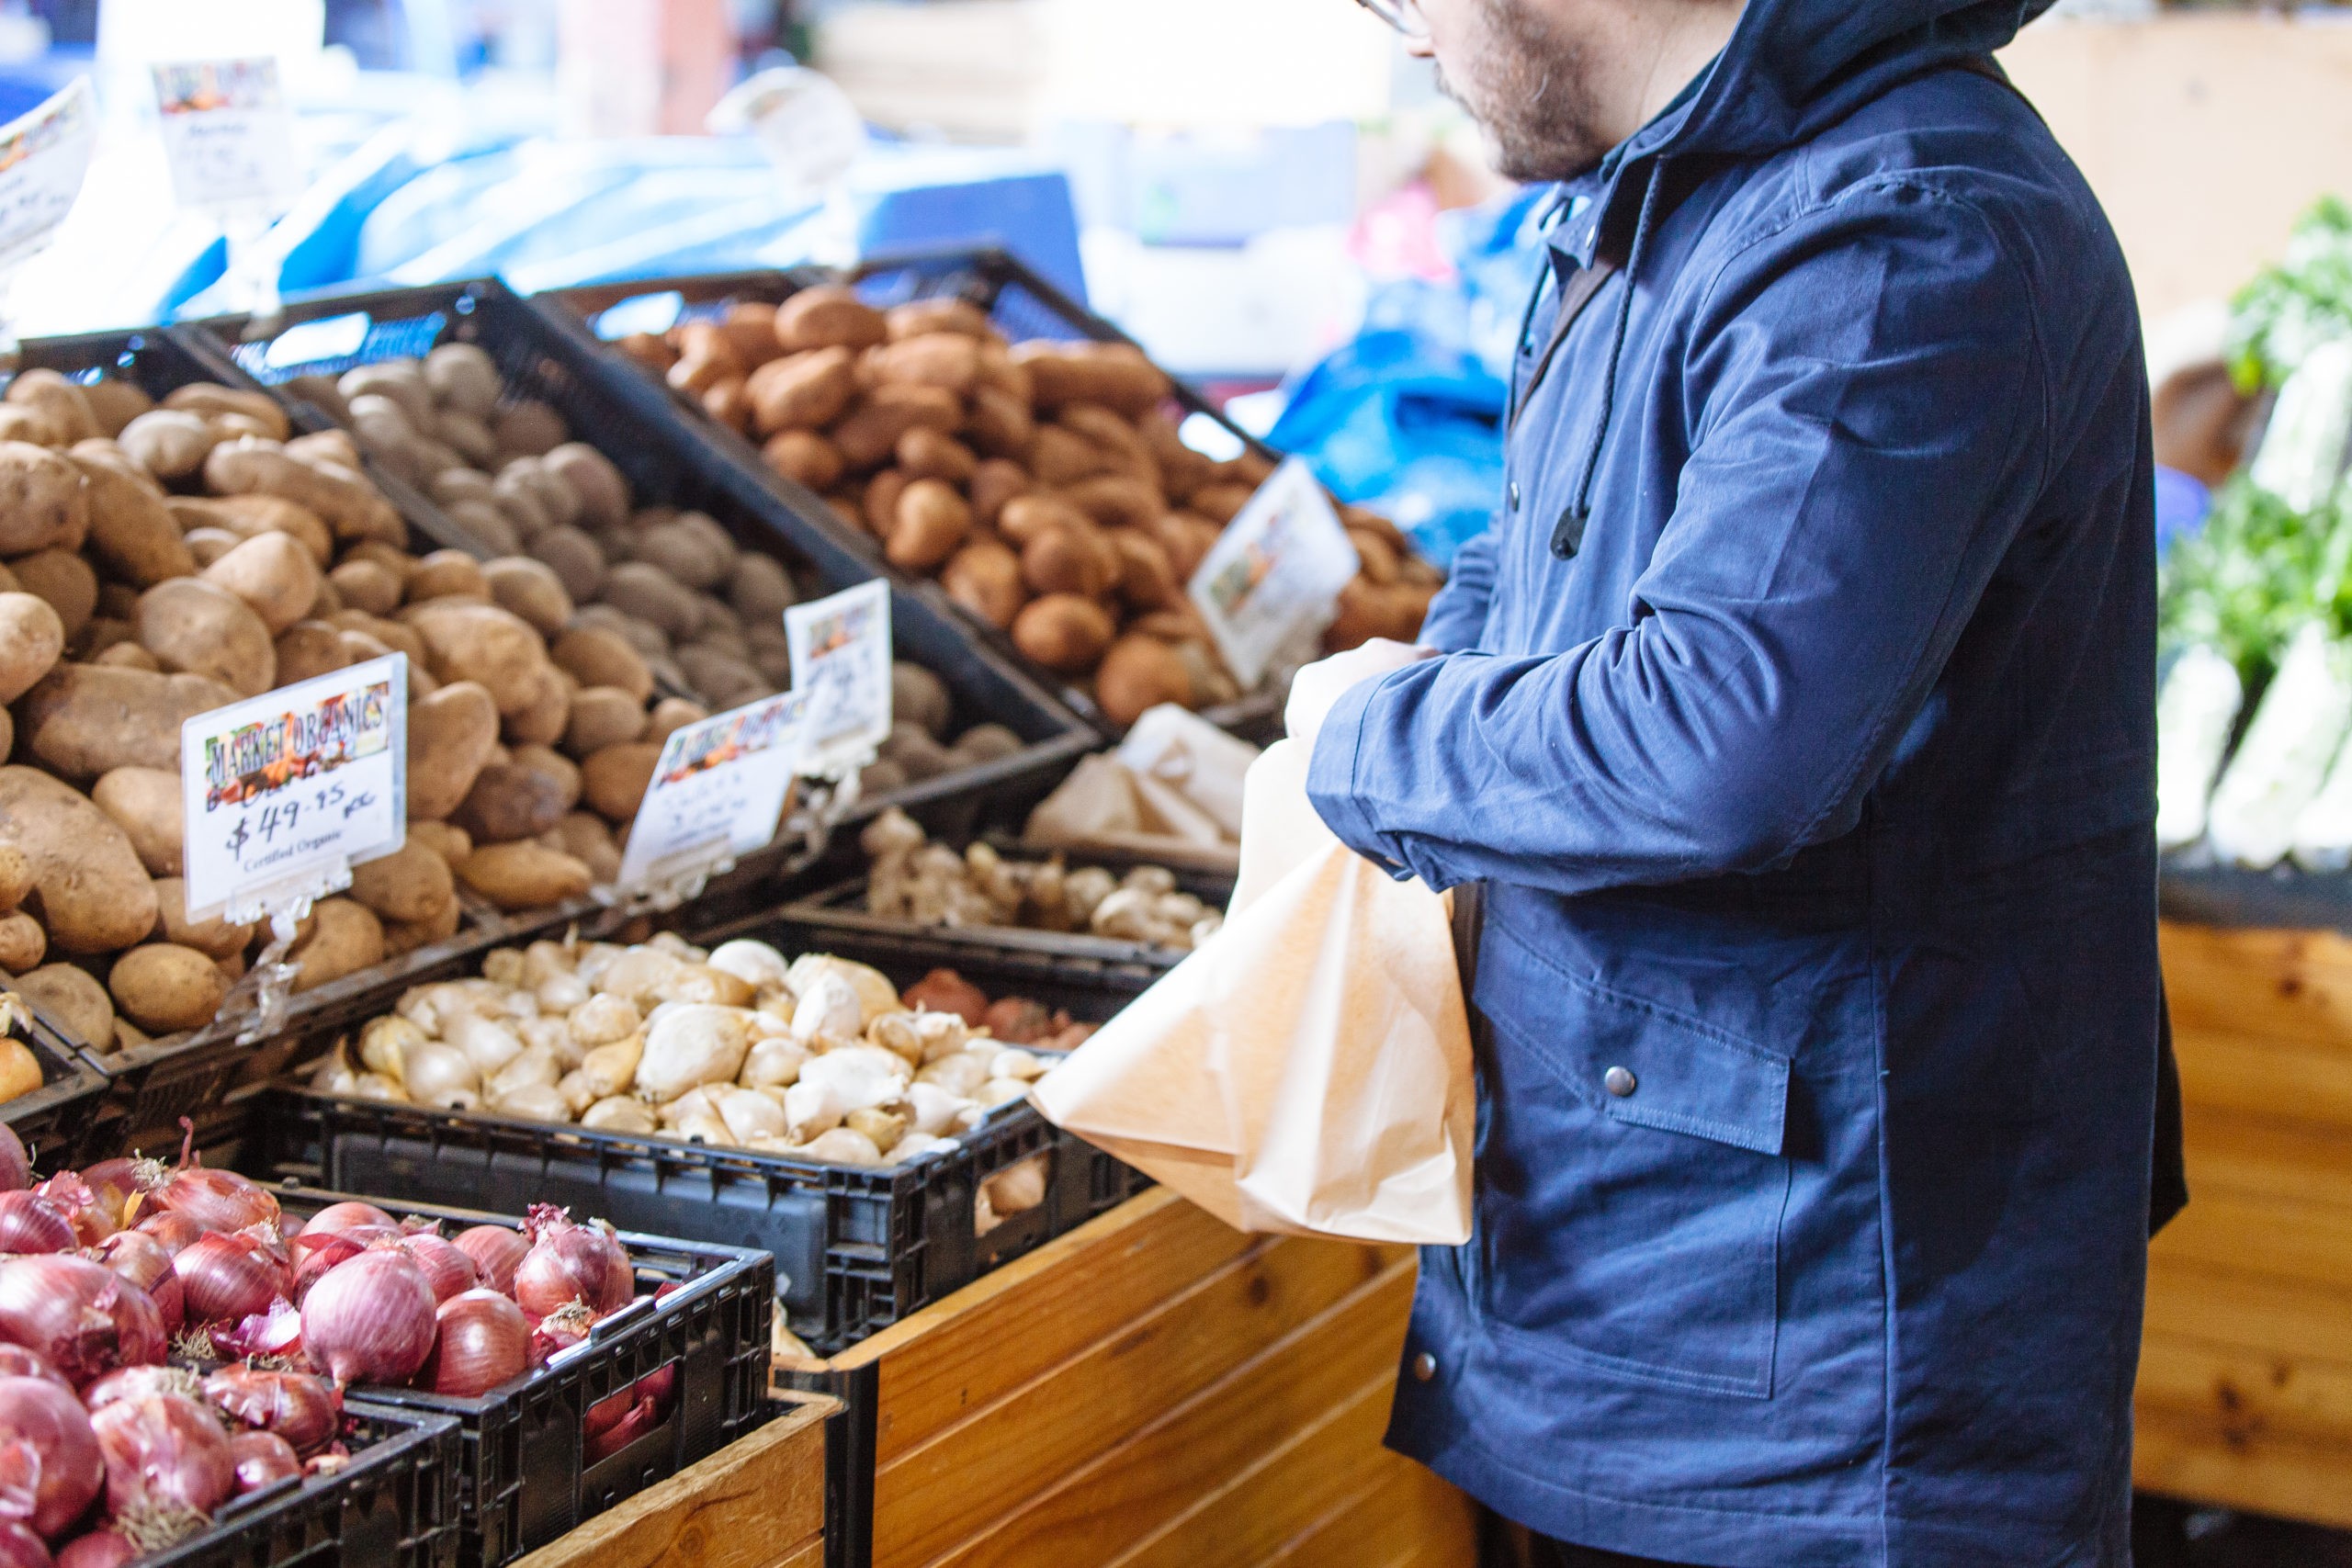 By giving your customers too many options and choice, you may be losing sales. Photo of man choosing fresh produce options, used in blog post by Good Business Consulting about how small businesses can create the right options that lead to purchases.